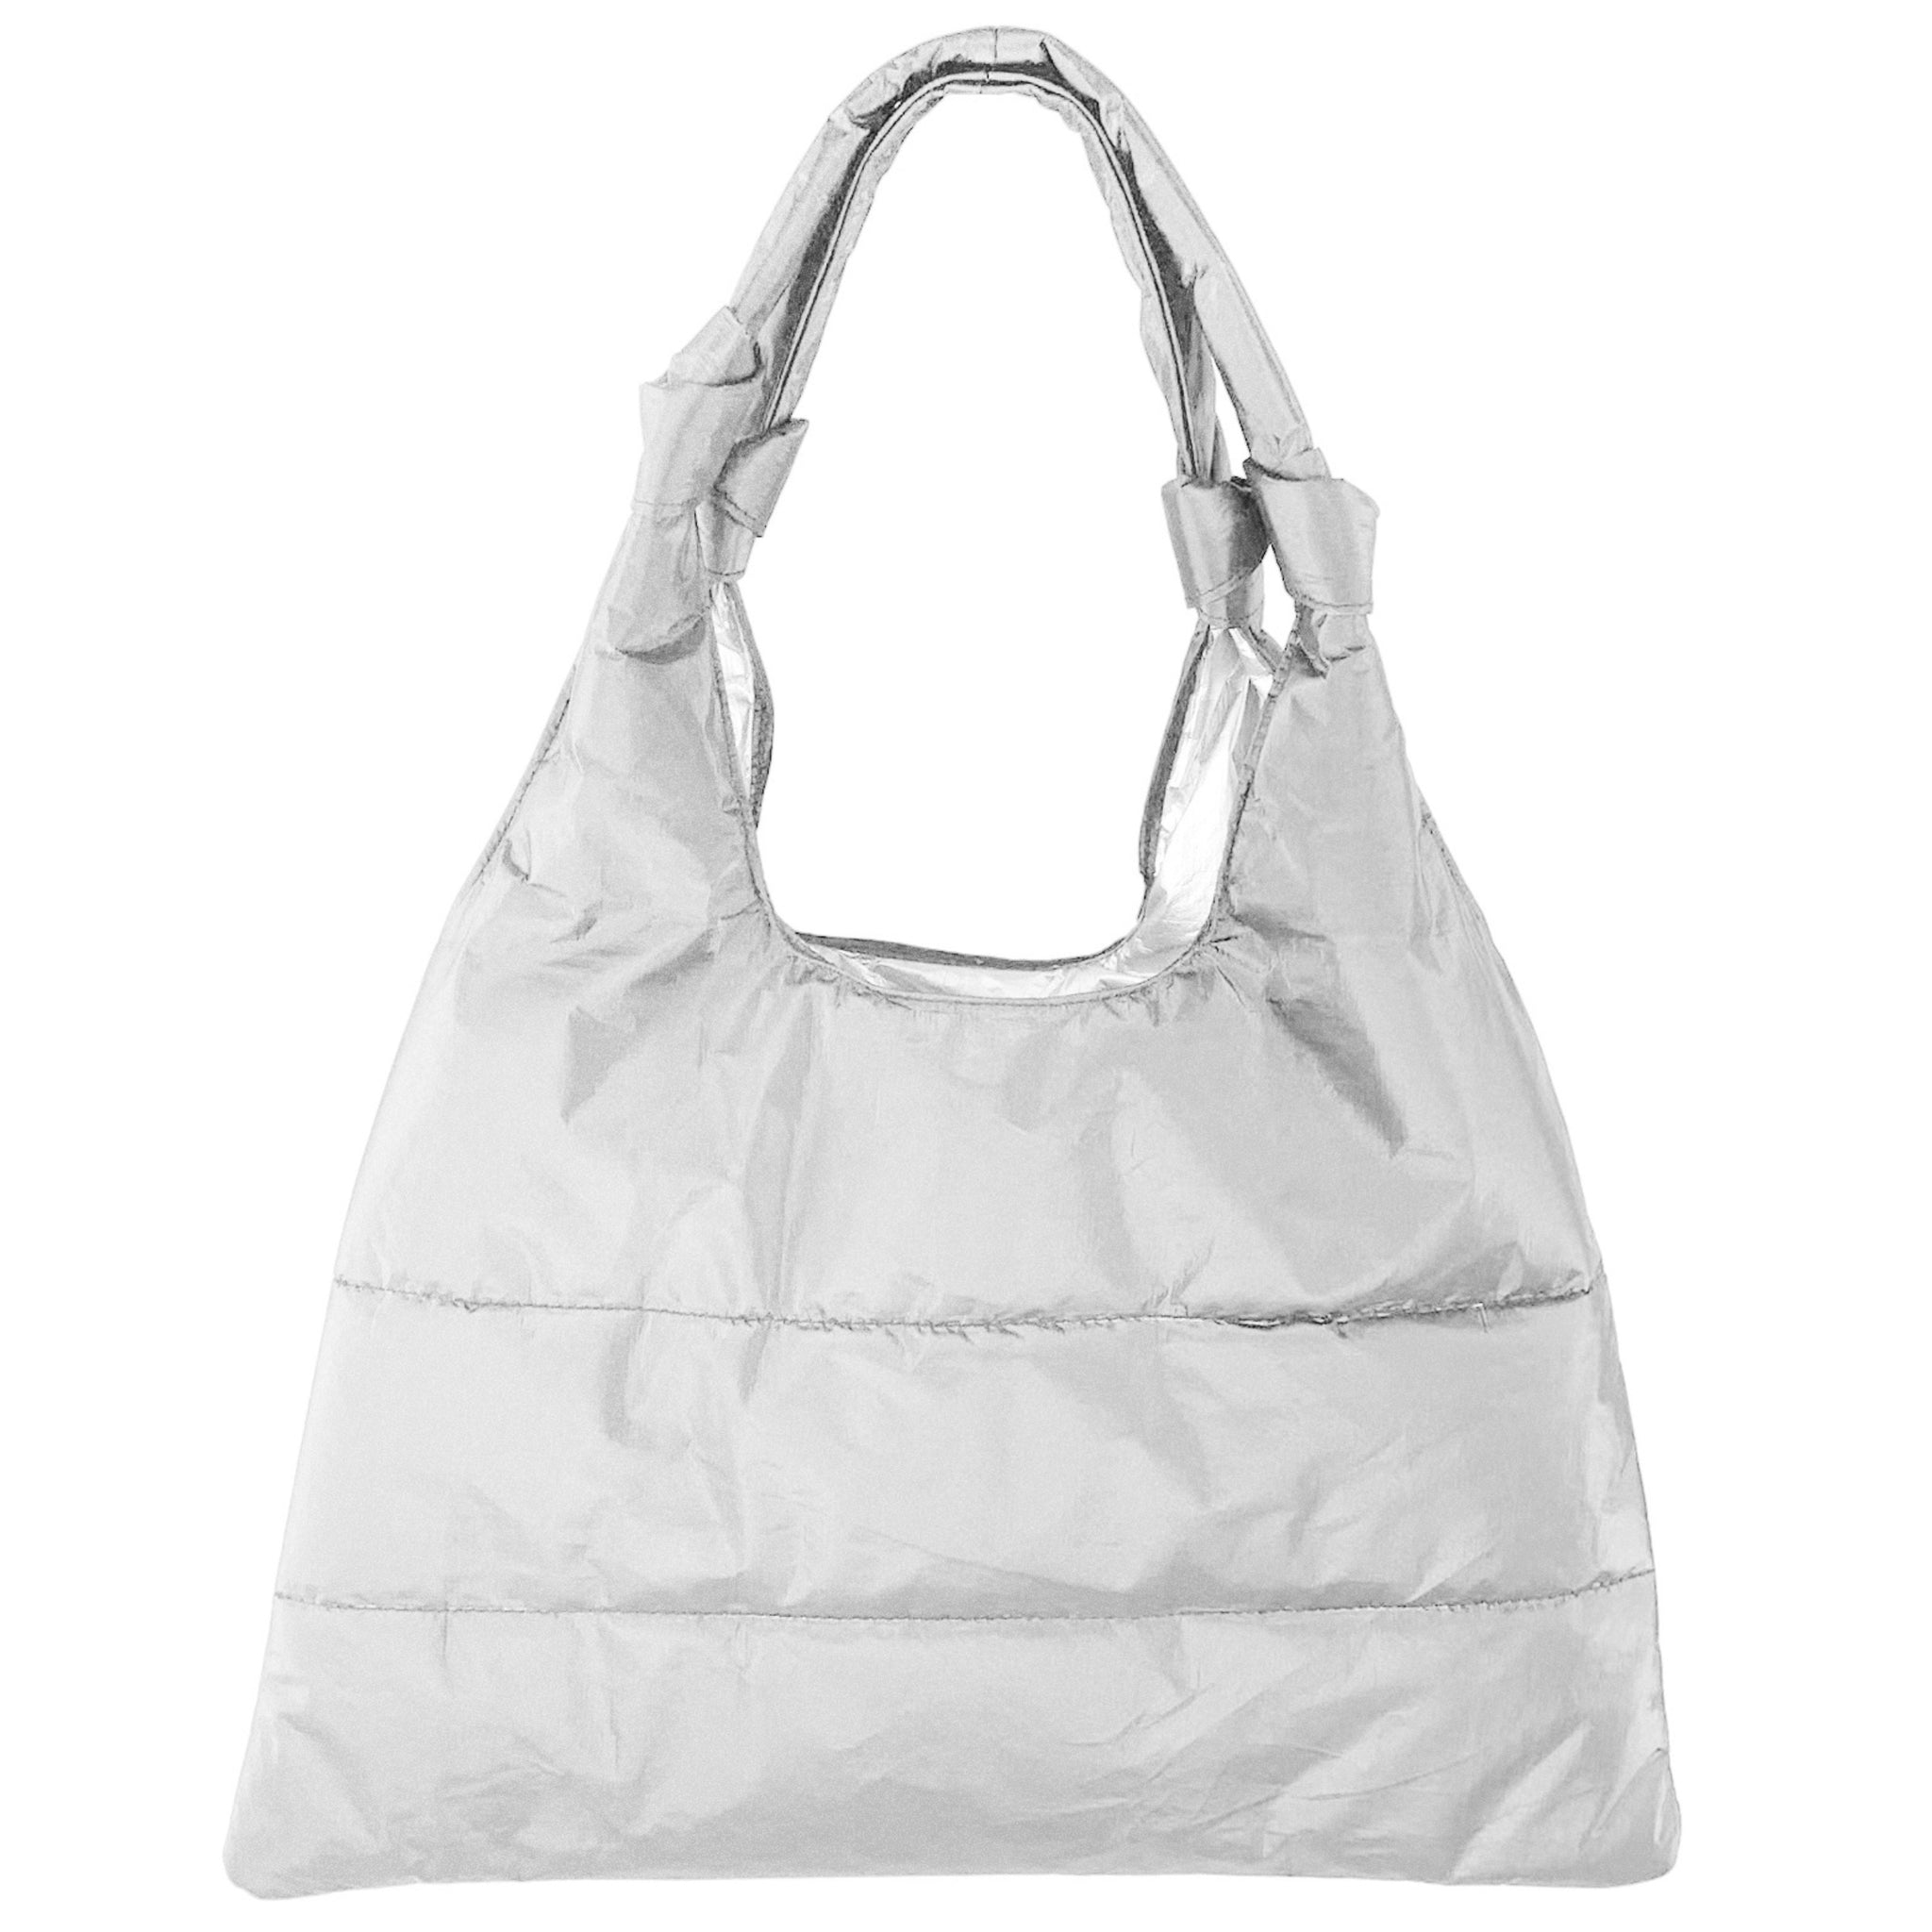 Love Me "Knot" Puffer Purse Tote in Shimmer White